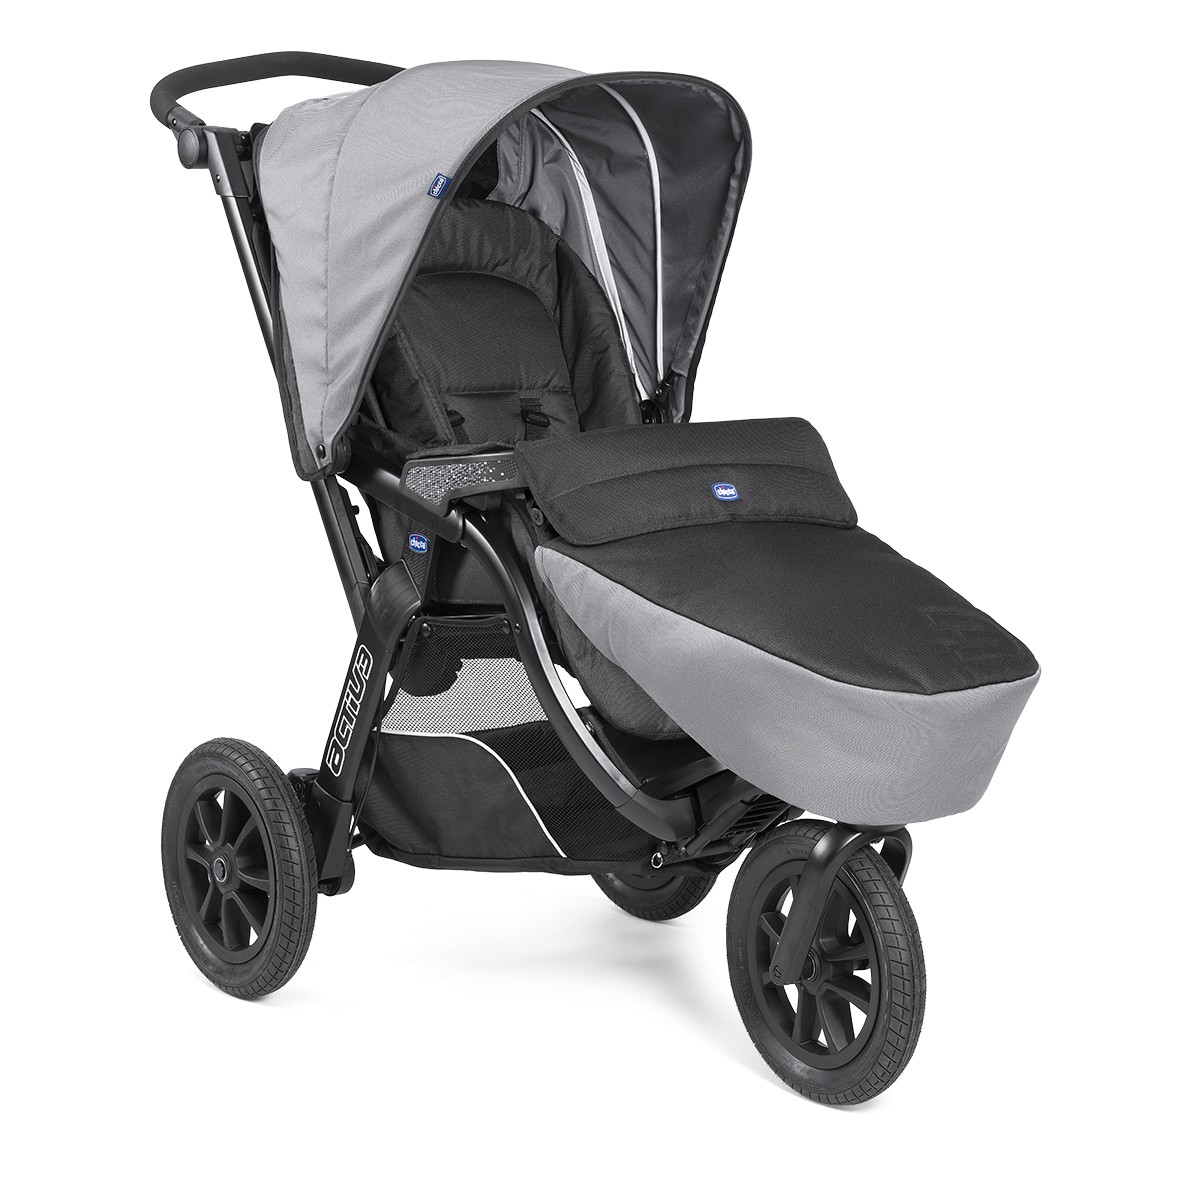 Chicco Activ3 stroller reviews, questions, dimensions